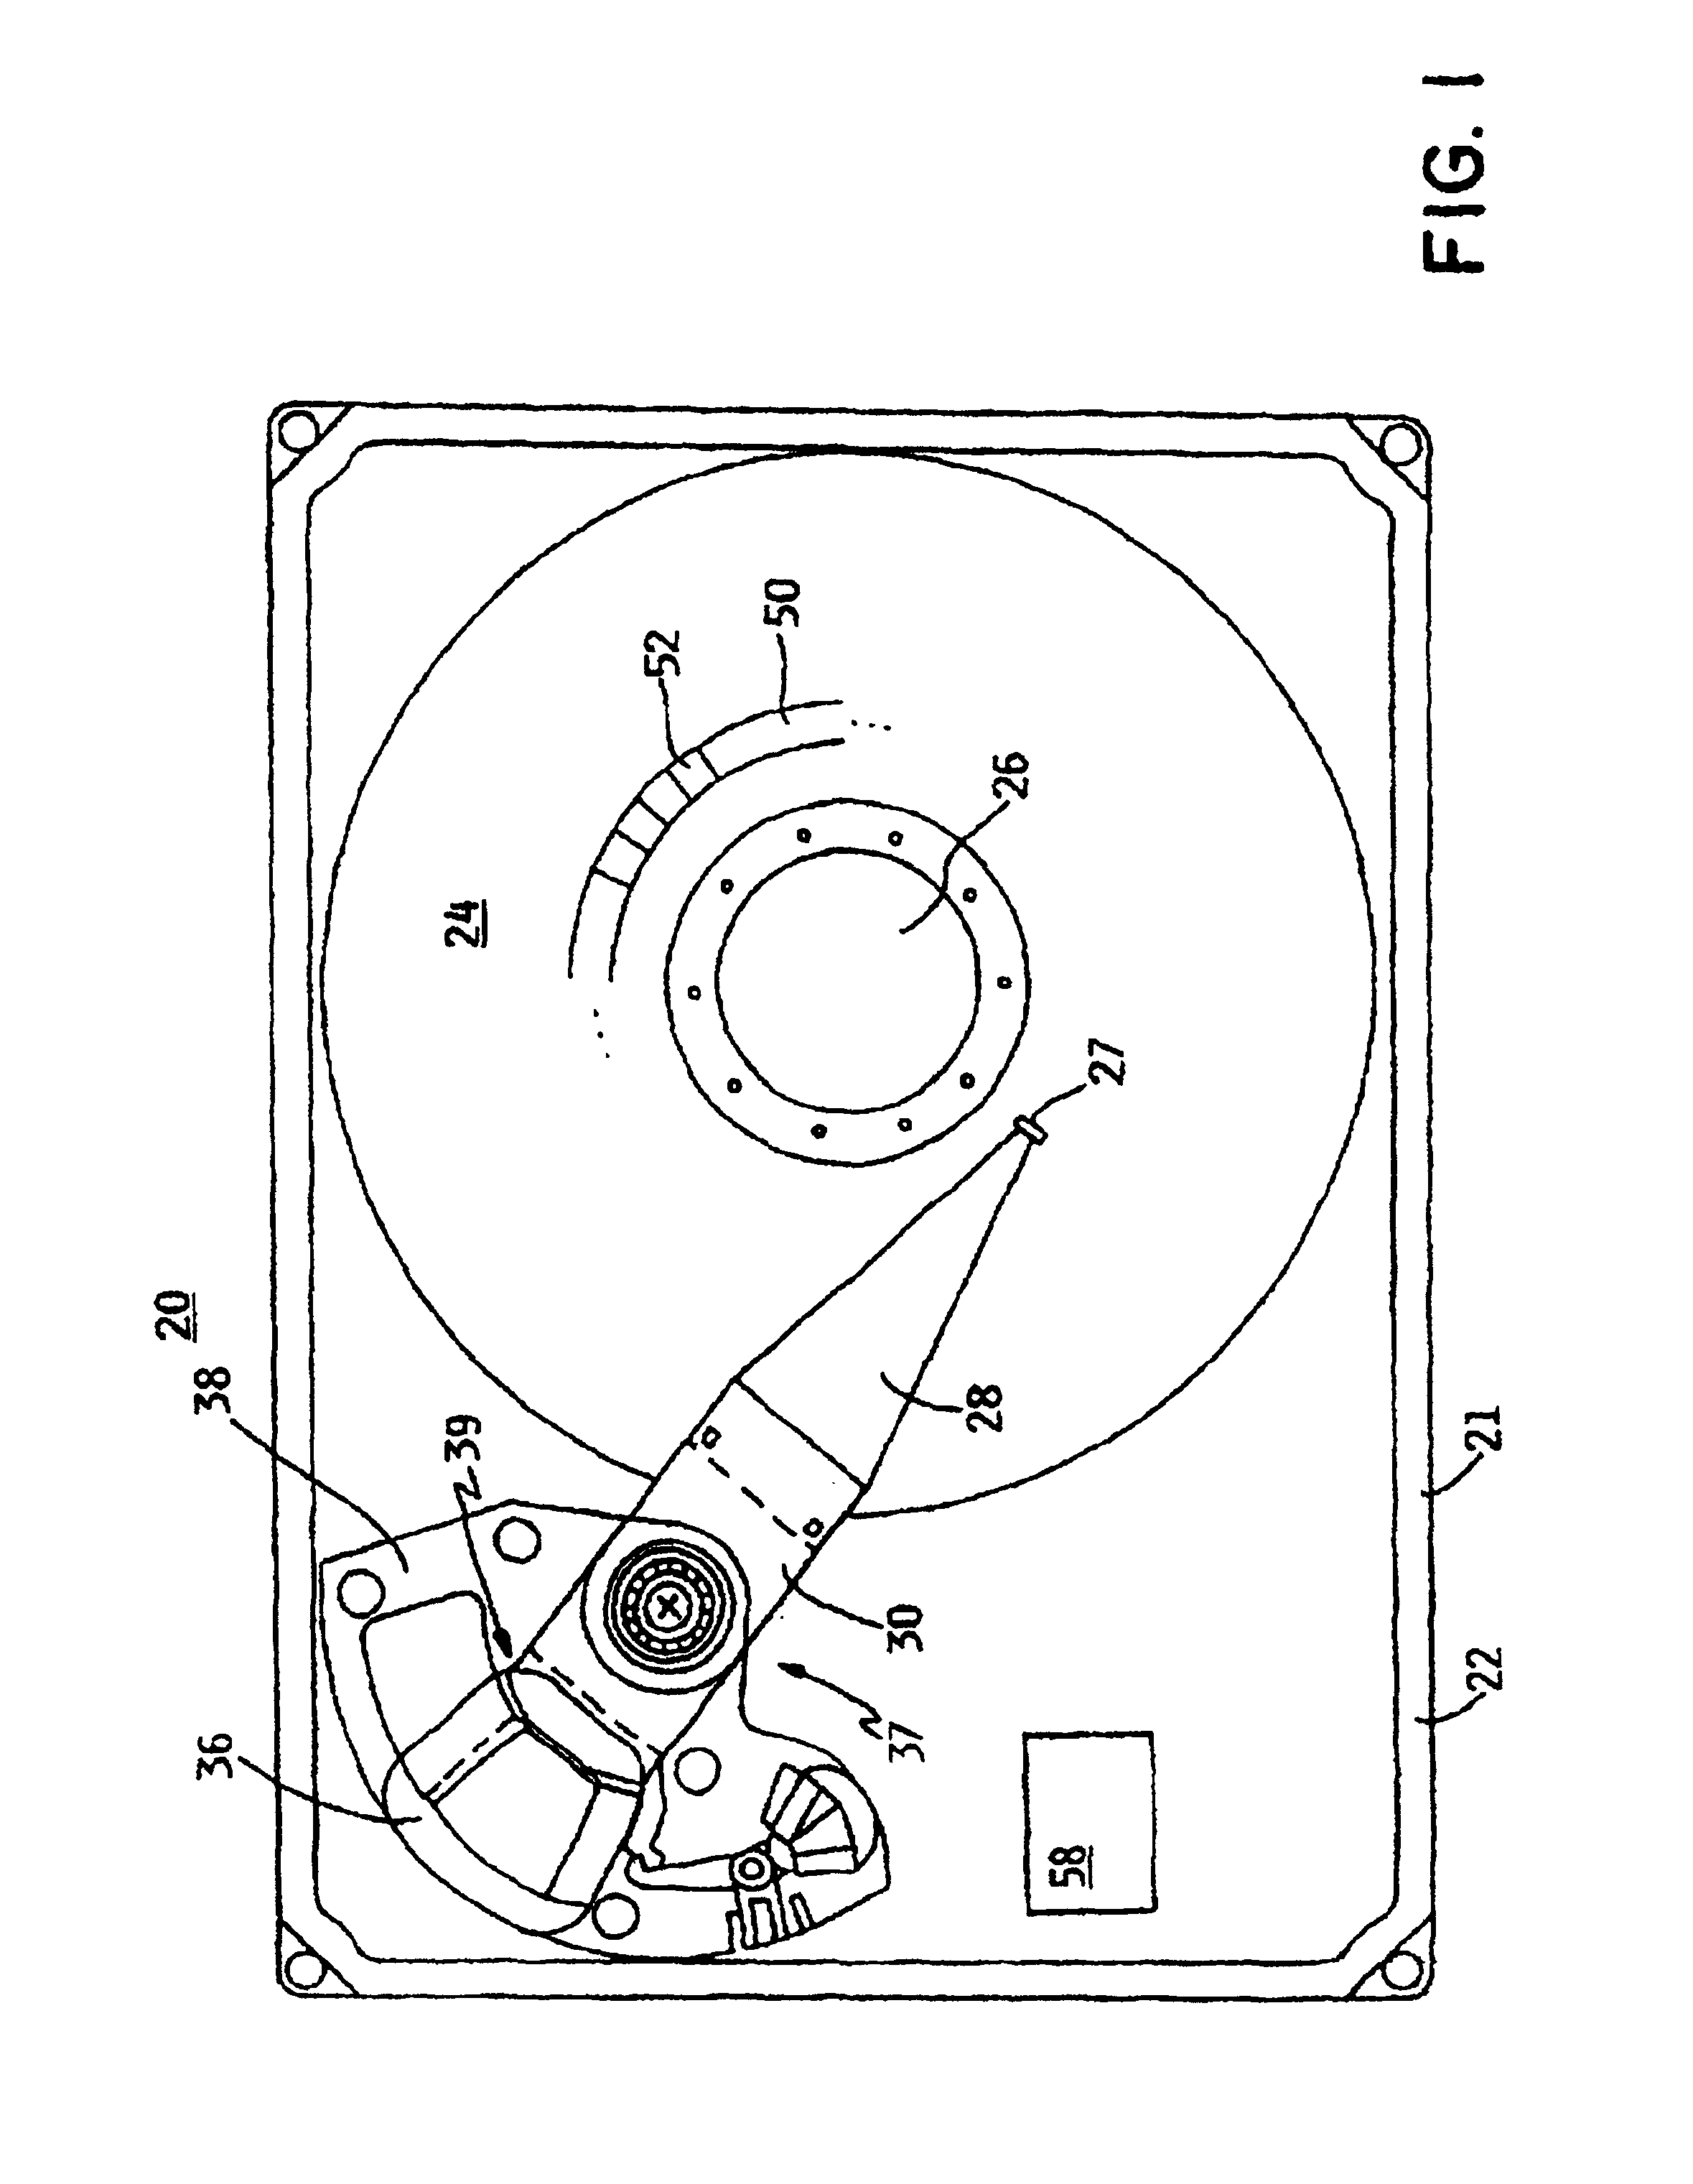 Method for look-ahead thermal sensing in a data storage device